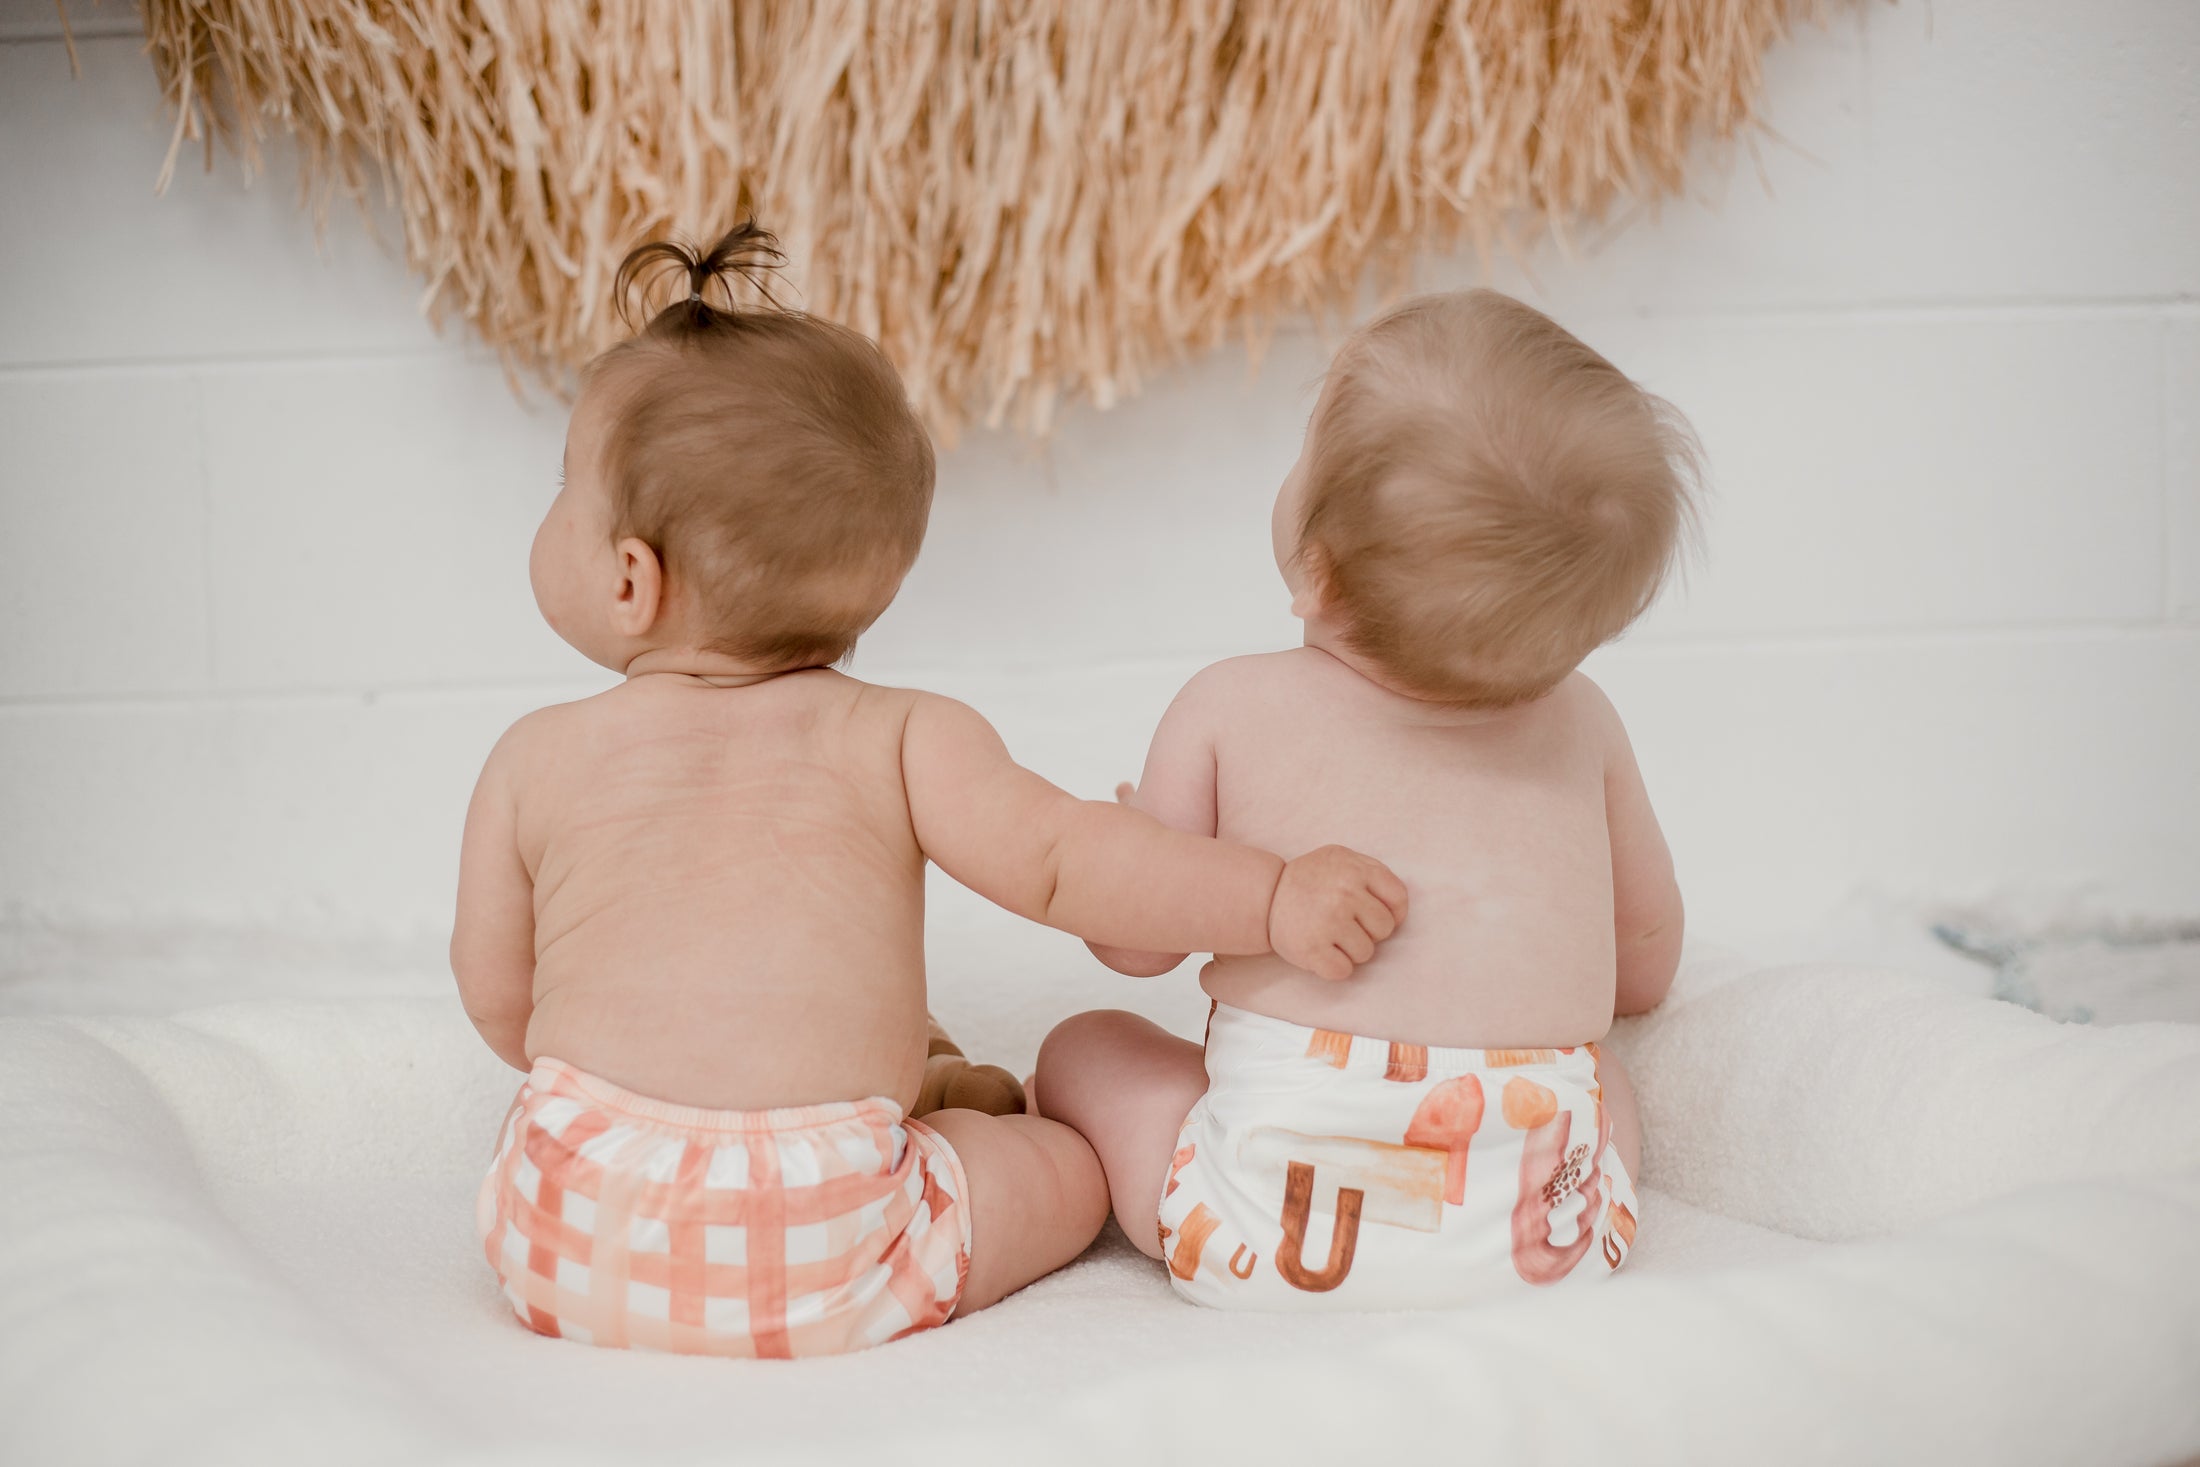 Girls Bloomers and Diaper Covers – Little Footprints Children's Shop